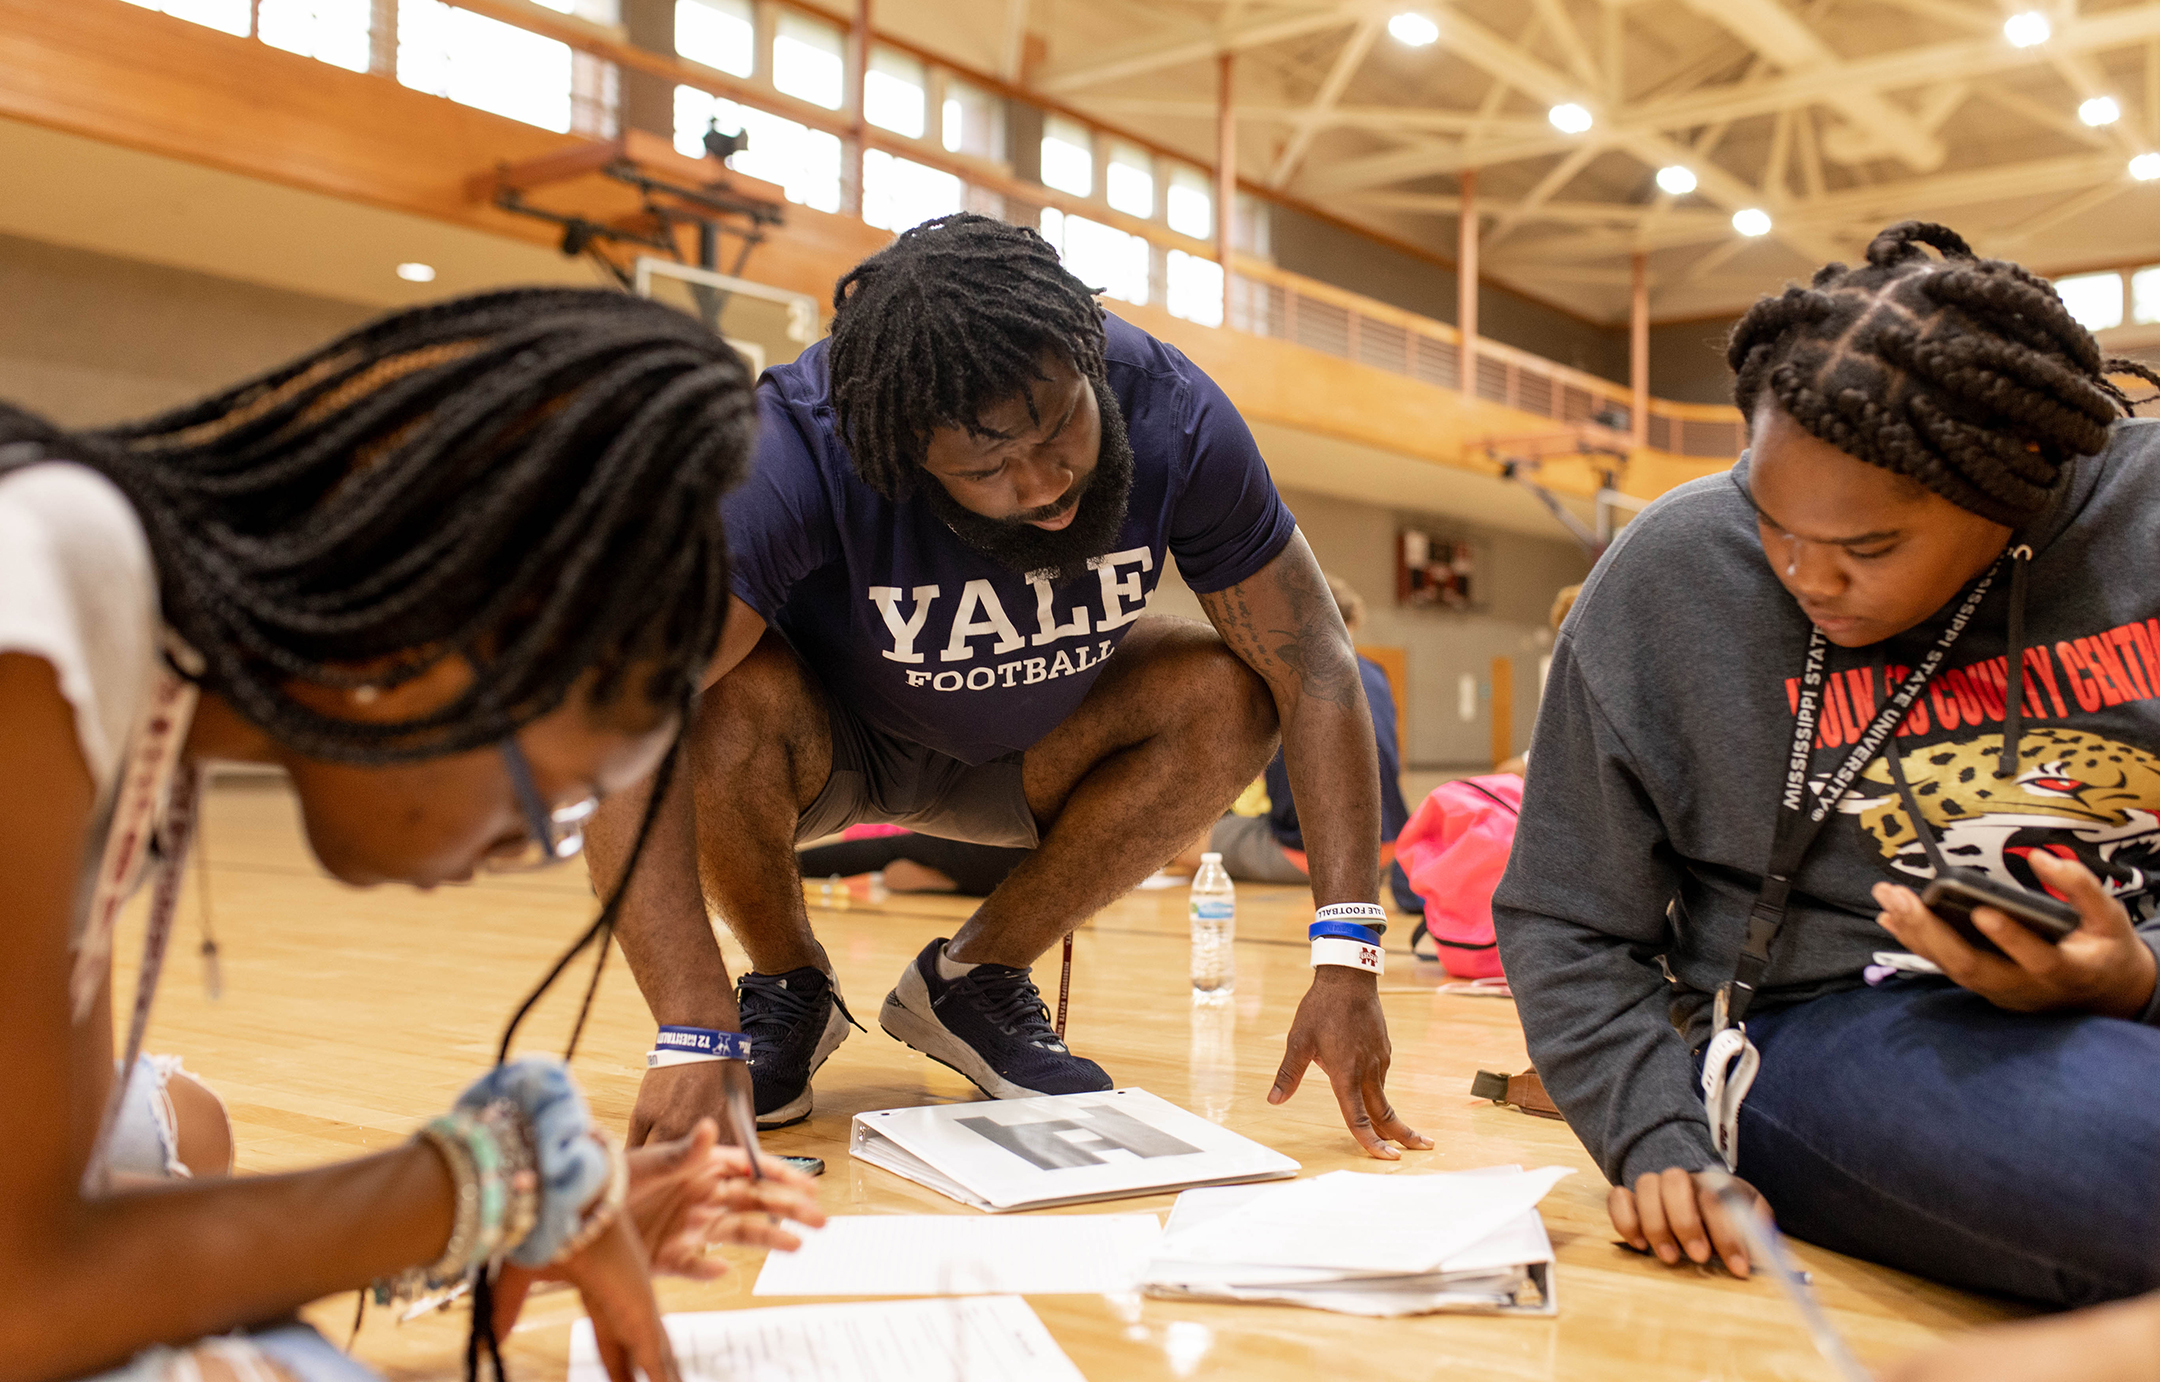 a black male student teaching assistant in a yale t-shirt works with two young black women on a project on a gym floor